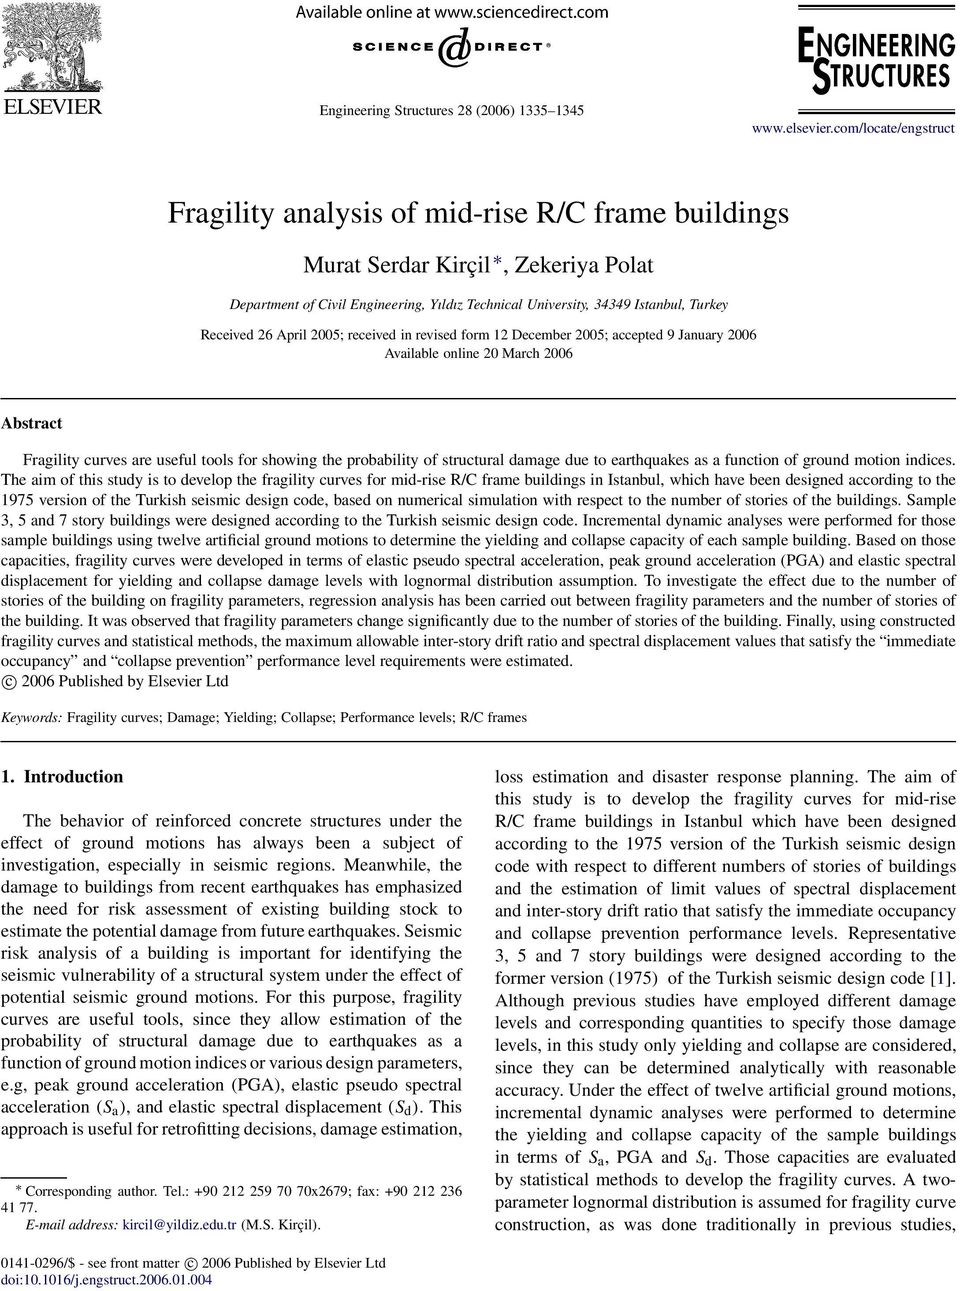 Received 26 April 2005; received in revised form 12 December 2005; accepted 9 January 2006 Available online 20 March 2006 Abstract Fragility curves are useful tools for showing the probability of